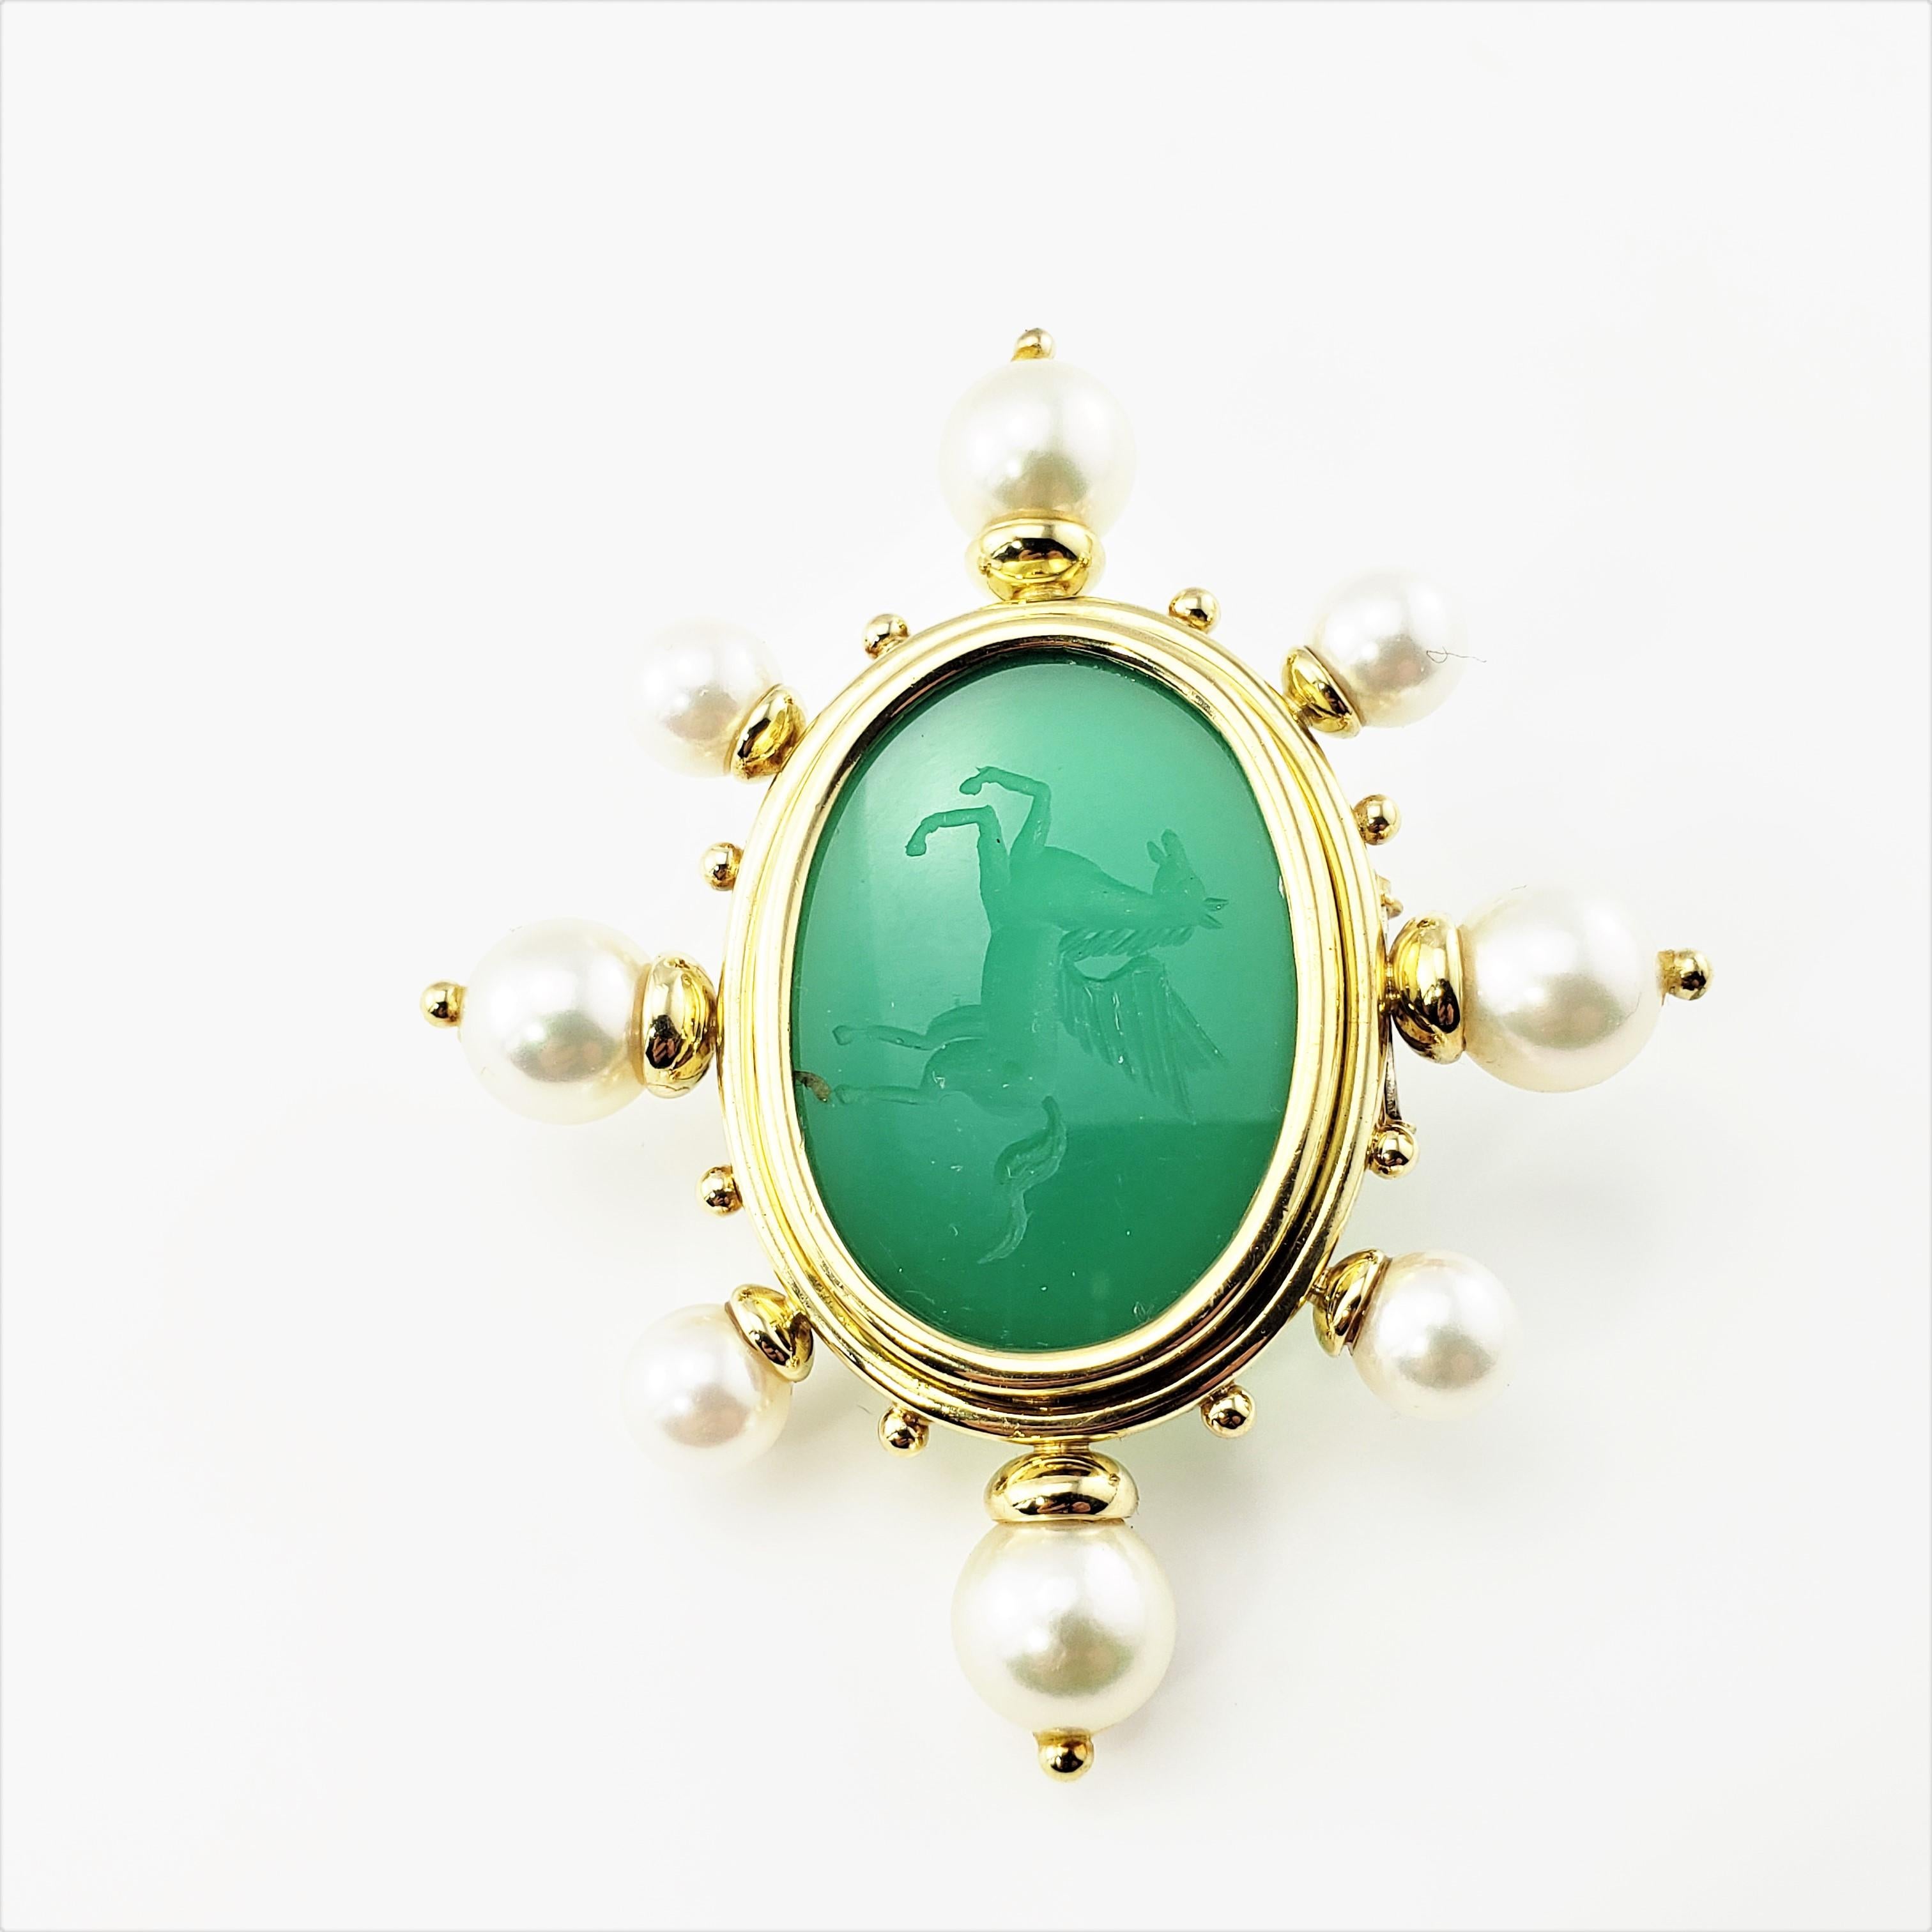 18 Karat Yellow Gold Intaglio Green Onyx and Pearl Pegasus Brooch/Pin-

This exquisite brooch features a carved pegasus in beautiful green onyx surrounded by eight white pearls (7-9 mm each).  Set in beautifully detailed 18K yellow gold.

Size: 2.4